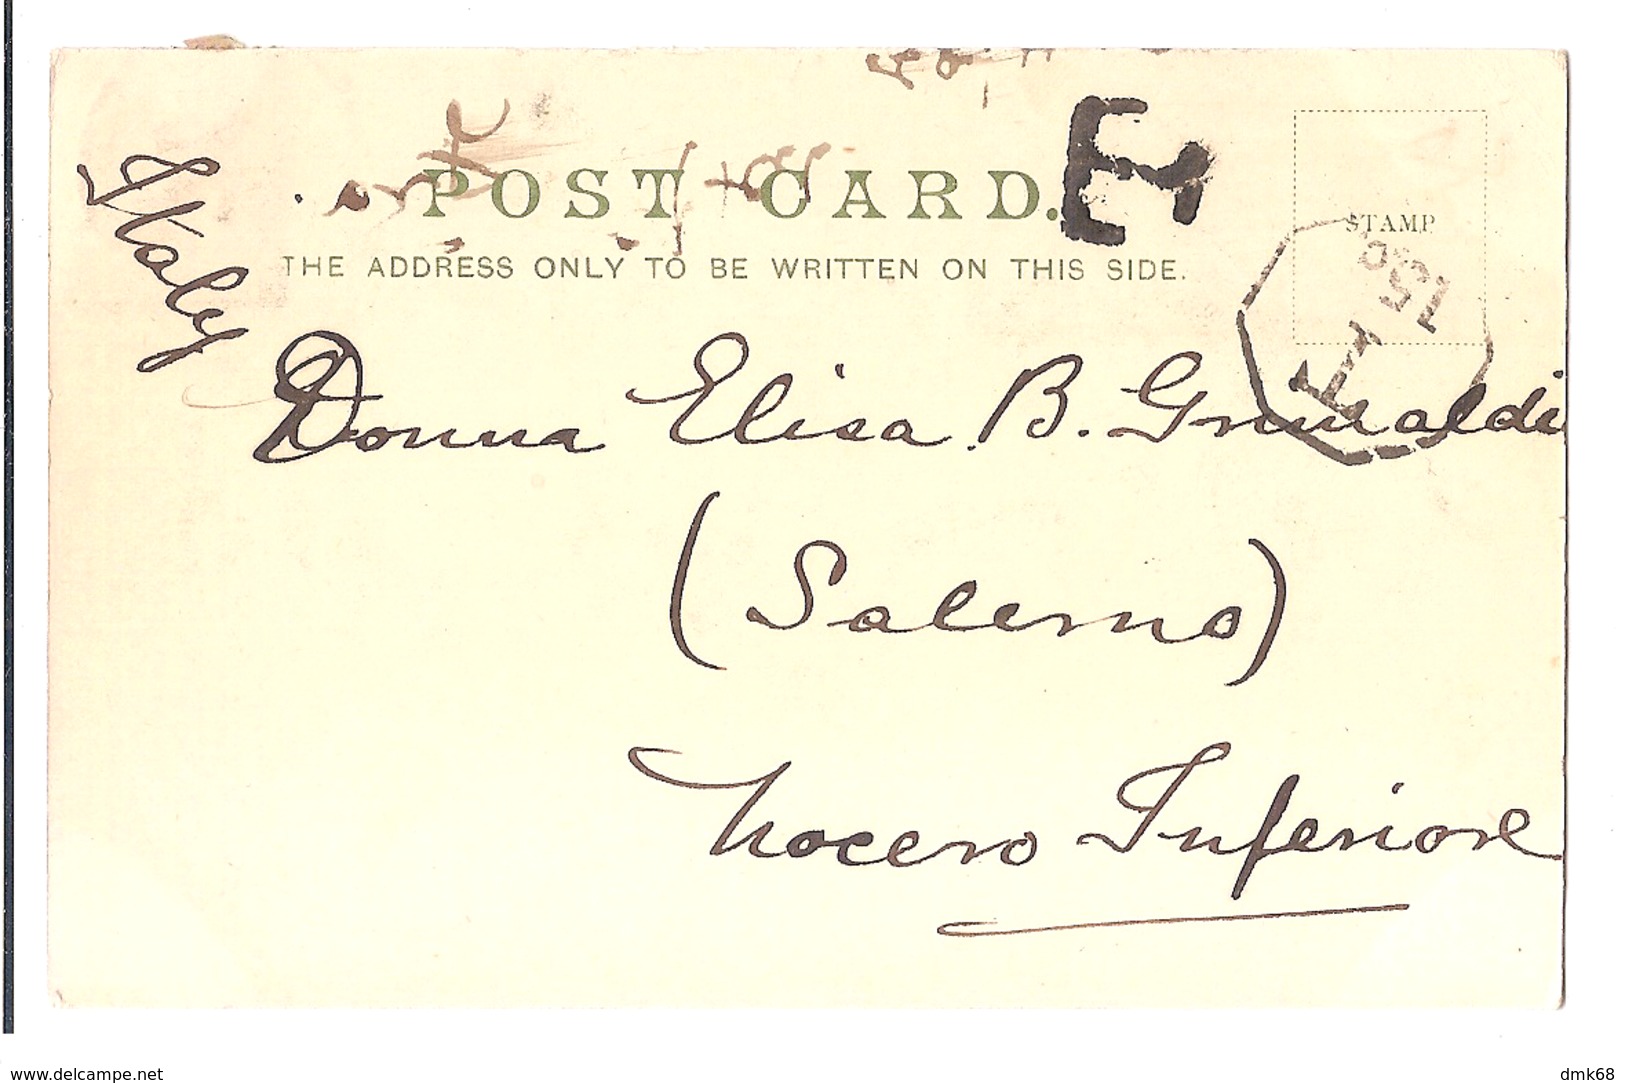 SOUTH AFRICA - EAST LONDON - NAHOON POINT - STAMP - MAILED TO ITALY 1902 - ( 2784) - South Africa